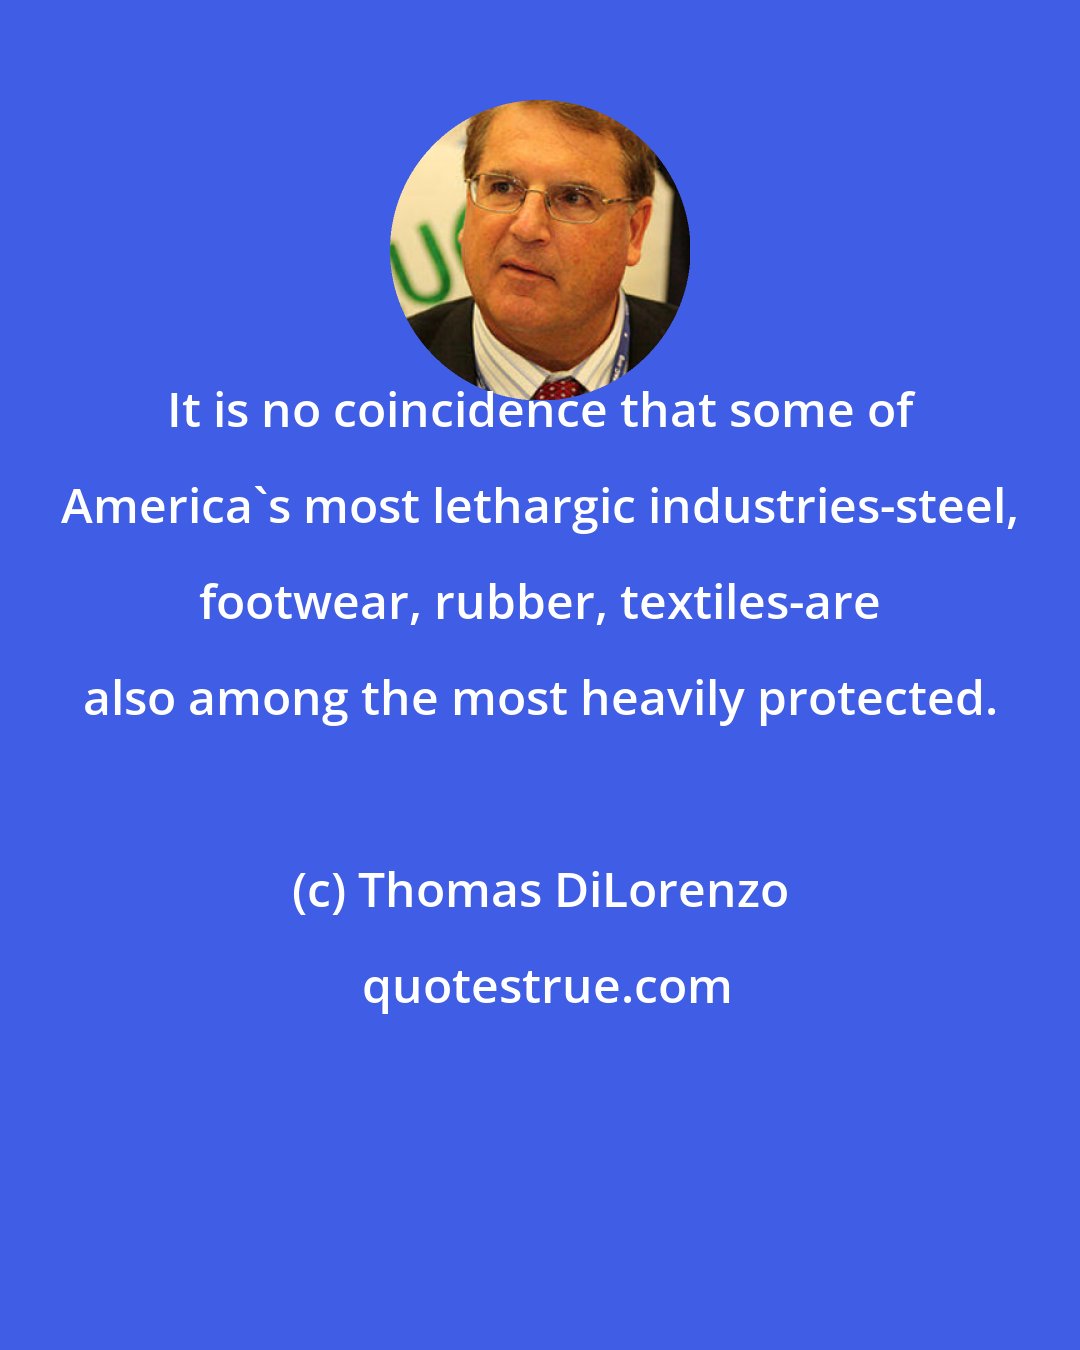 Thomas DiLorenzo: It is no coincidence that some of America's most lethargic industries-steel, footwear, rubber, textiles-are also among the most heavily protected.